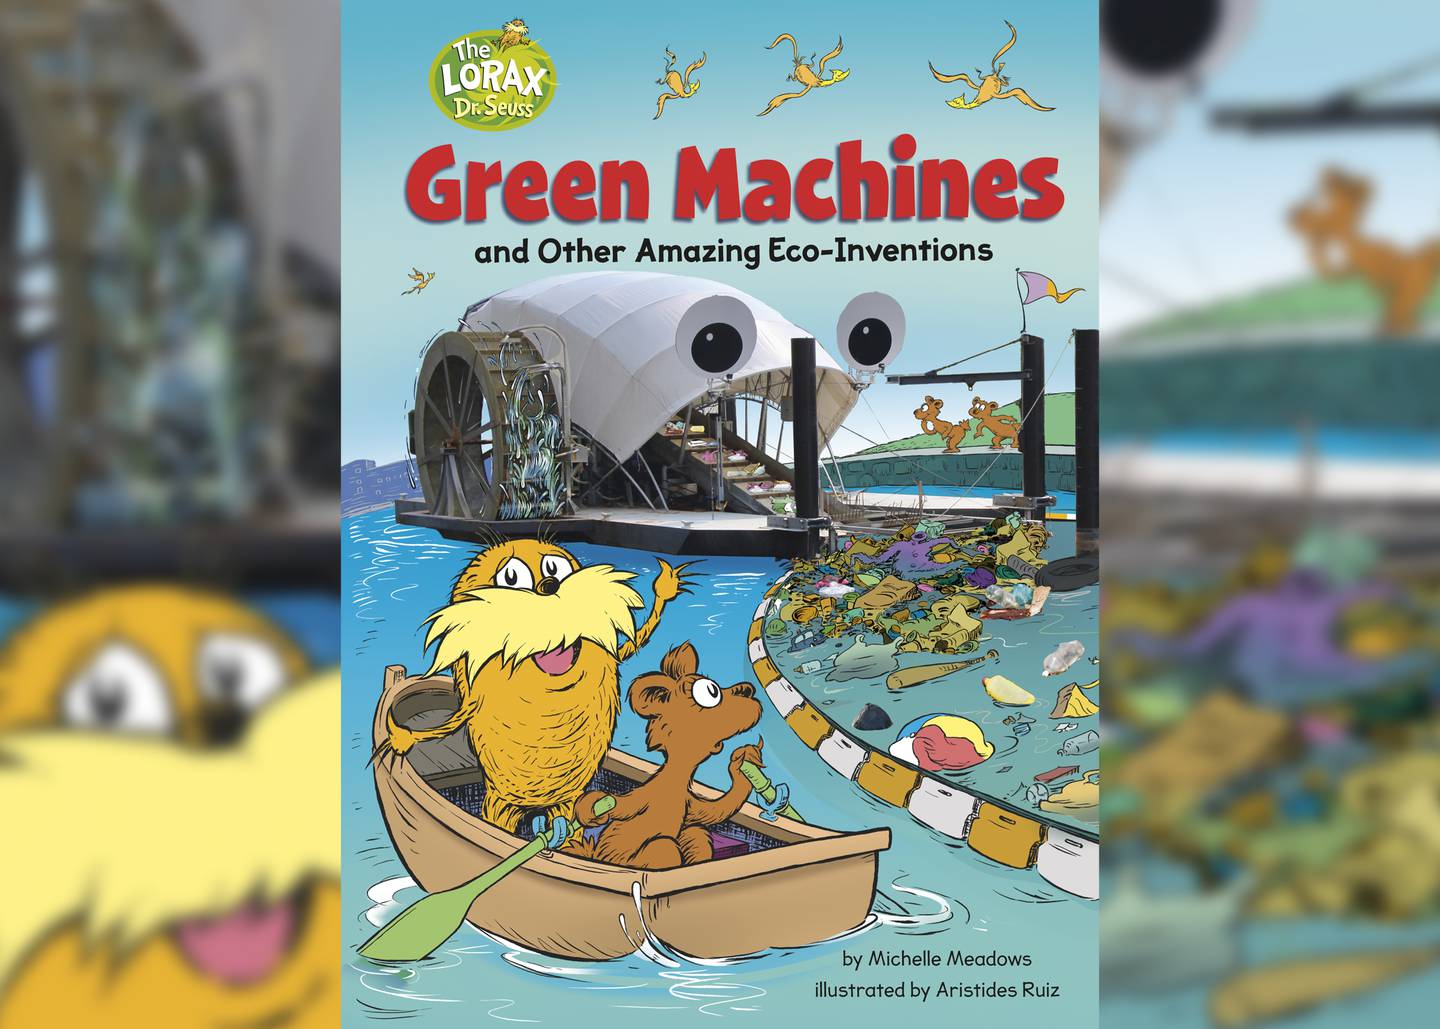 Mr. Trash Wheel meets The Lorax in "Green Machines and Other Amazing Eco-Inventions" coming out in March.